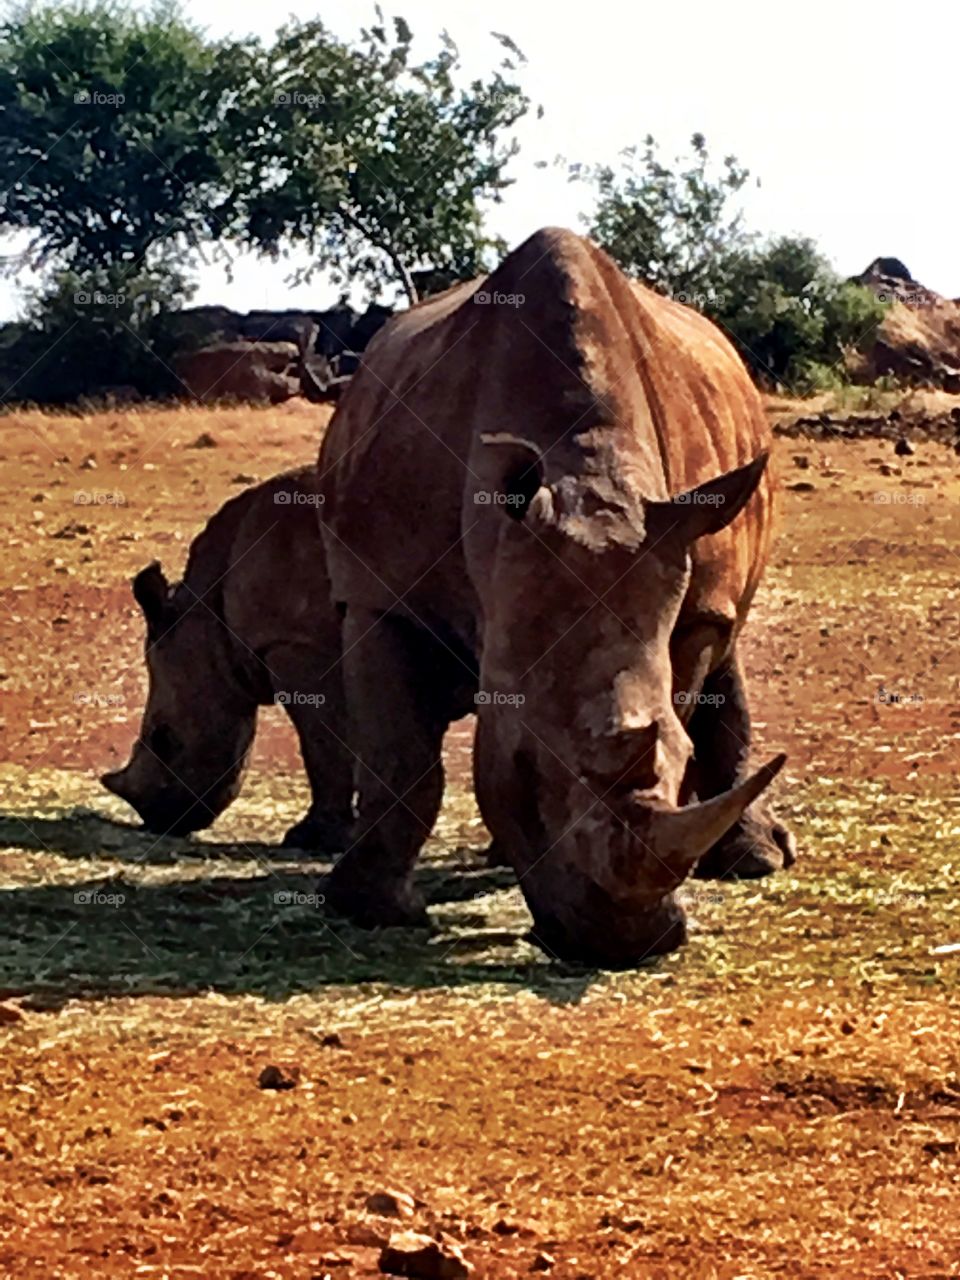 A Rhino and calf grazing in the late afternoon at the Lion and Rhino park South Africa